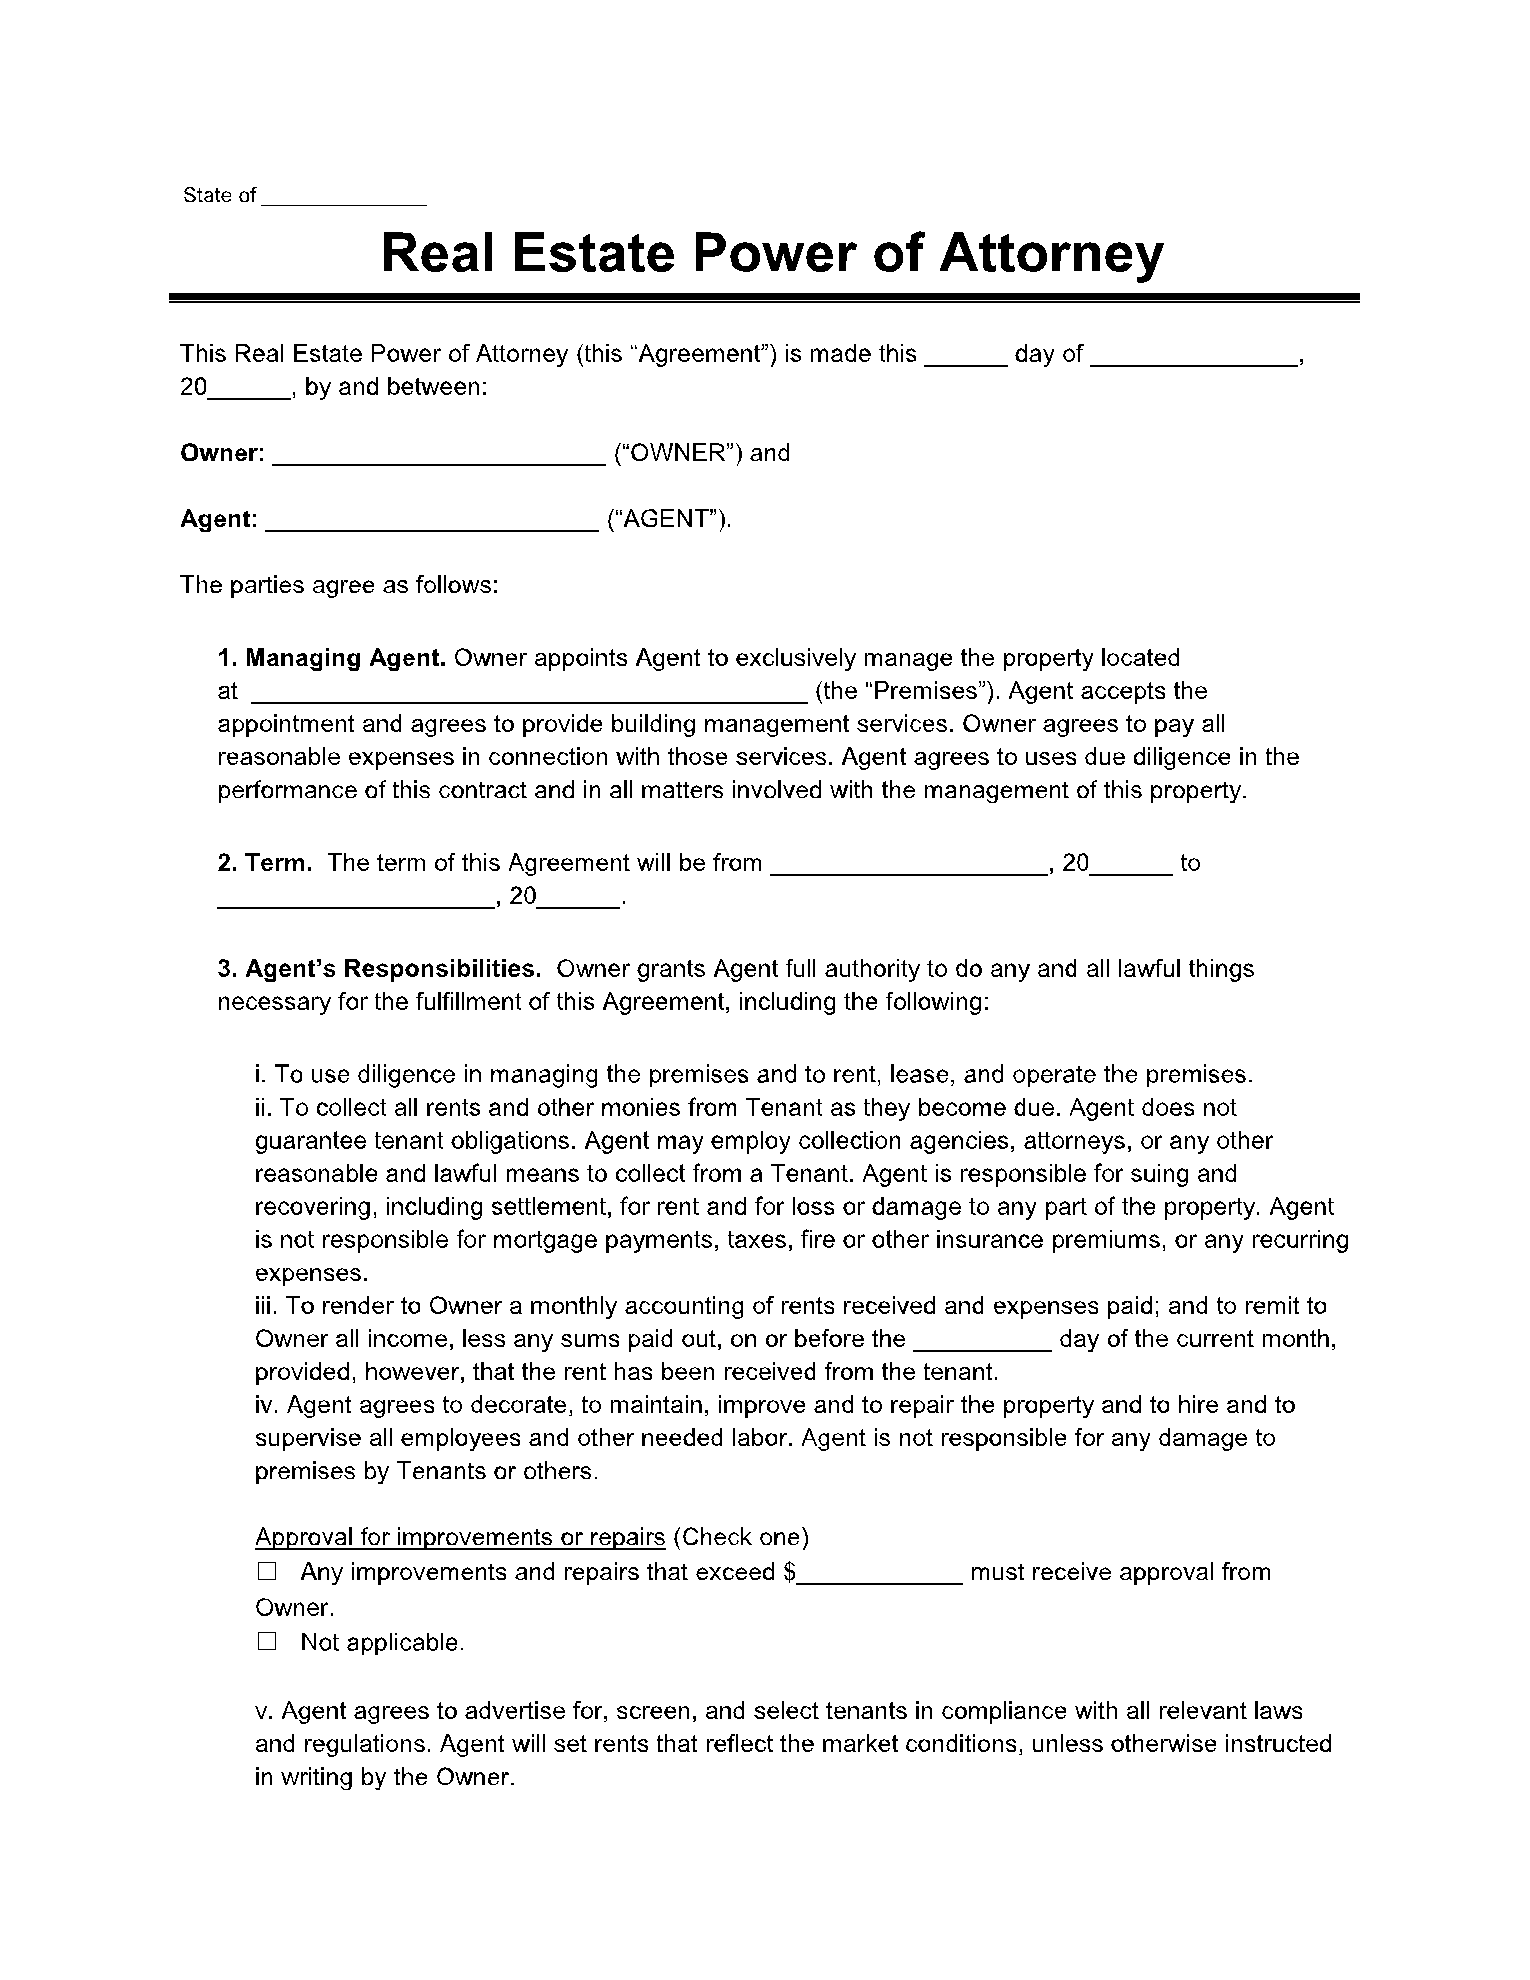 Power of Attorney Form in PA